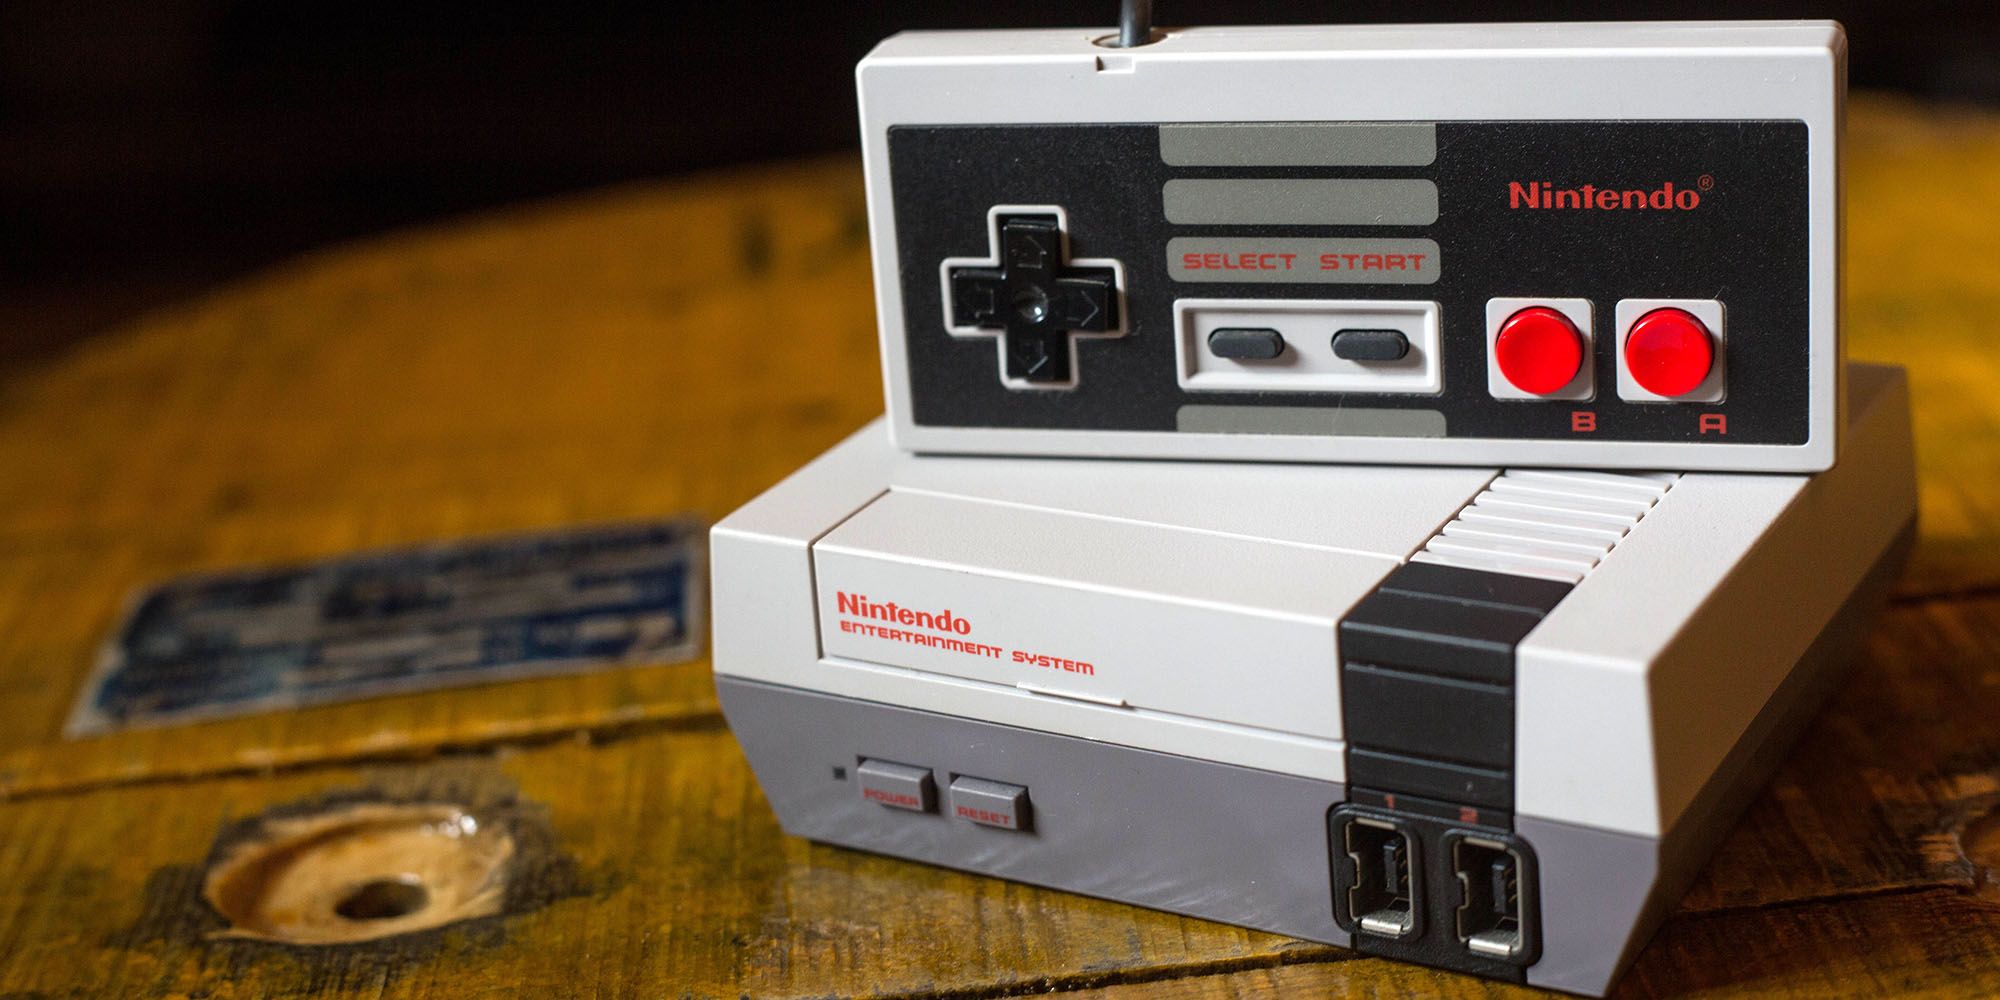 Måler en Hollywood Where to Get Nintendo NES Classic 2018 - NES Classic Released Today for $60